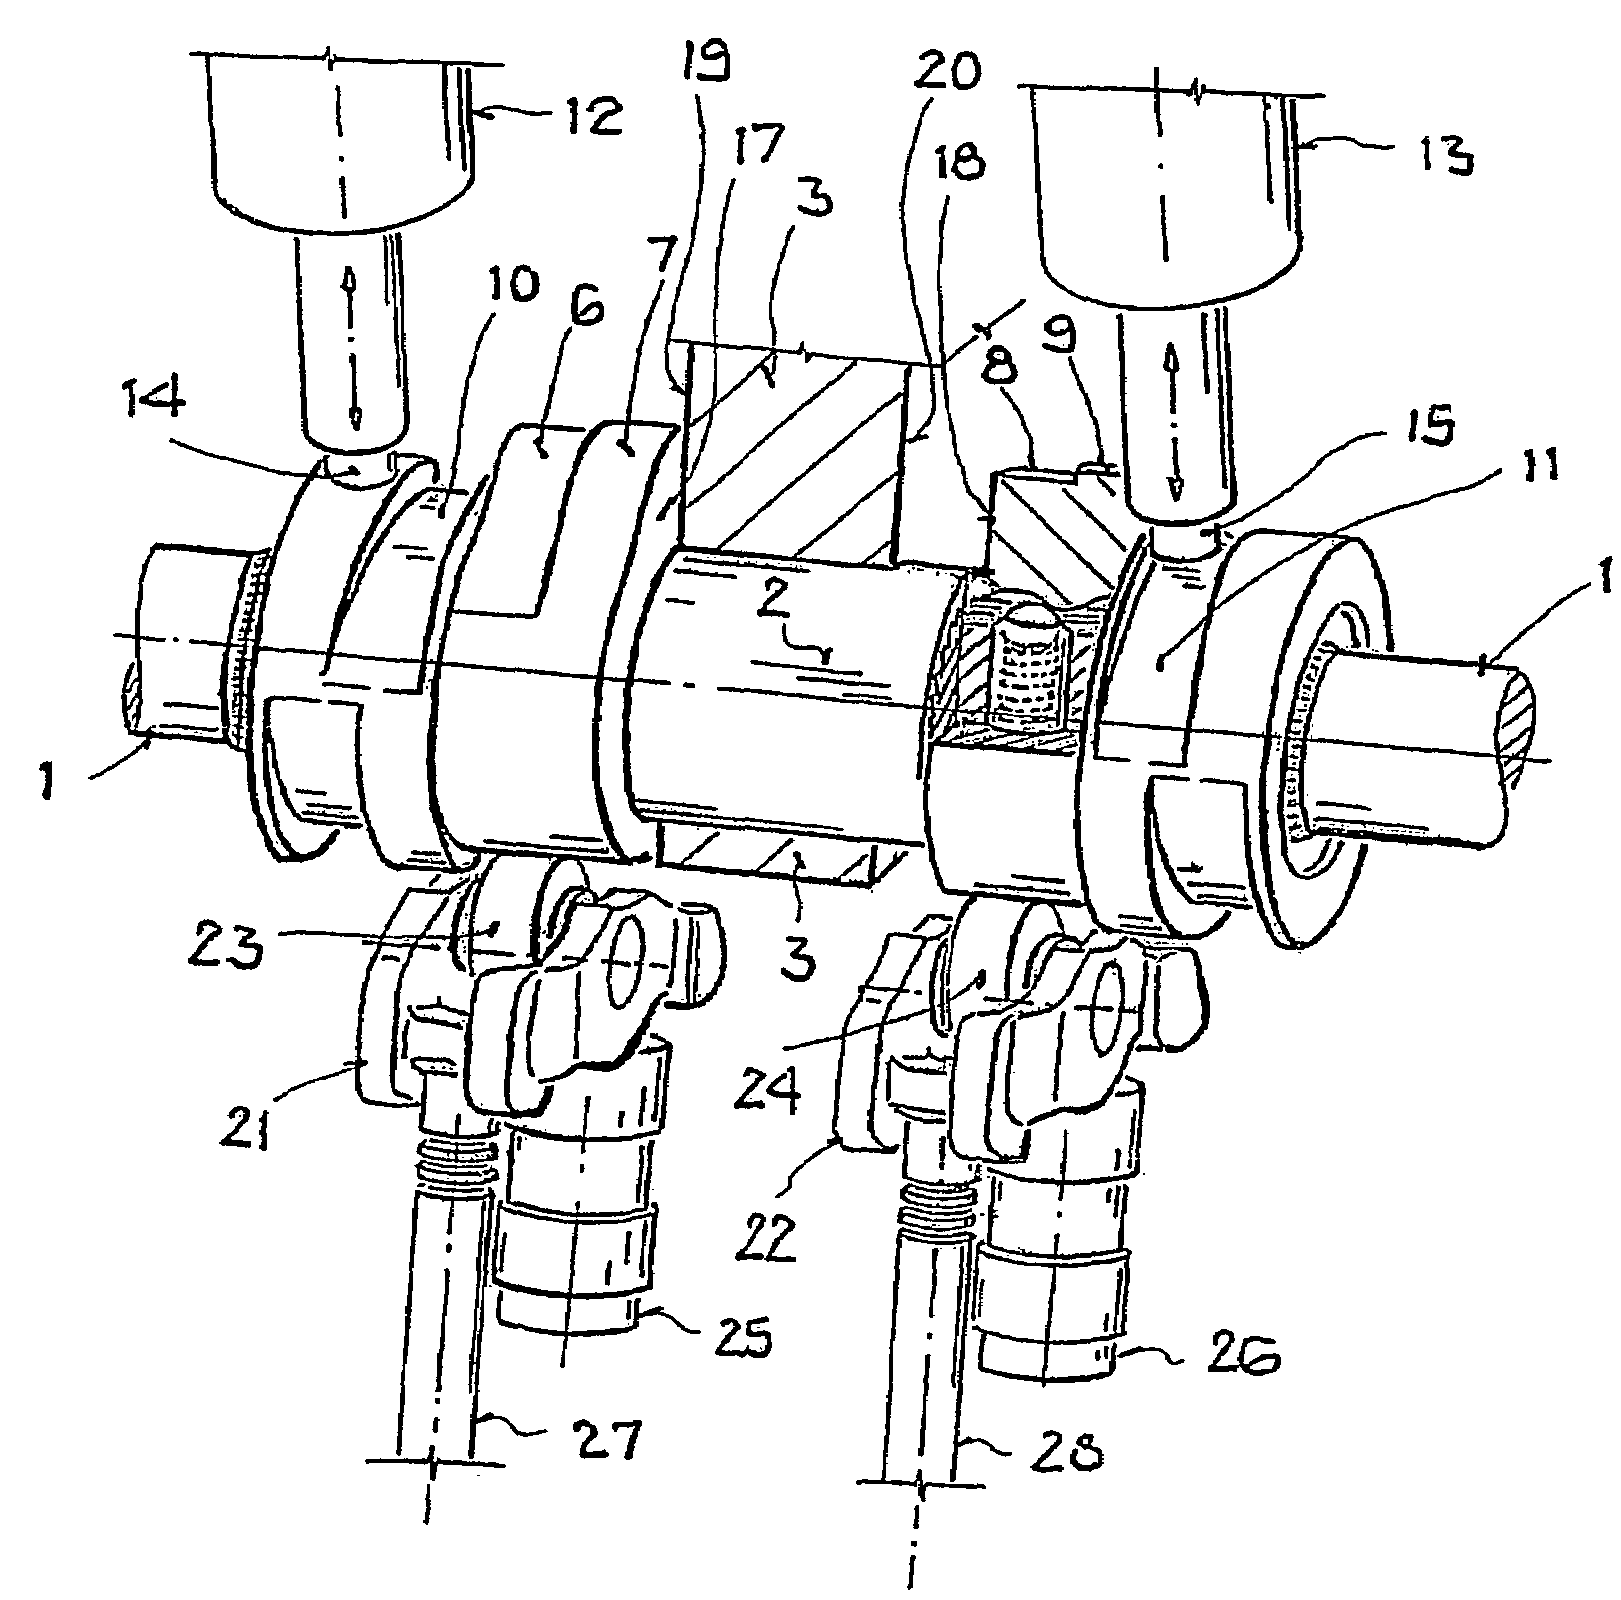 Valve drive of an internal combustion engine comprising a cylinder head